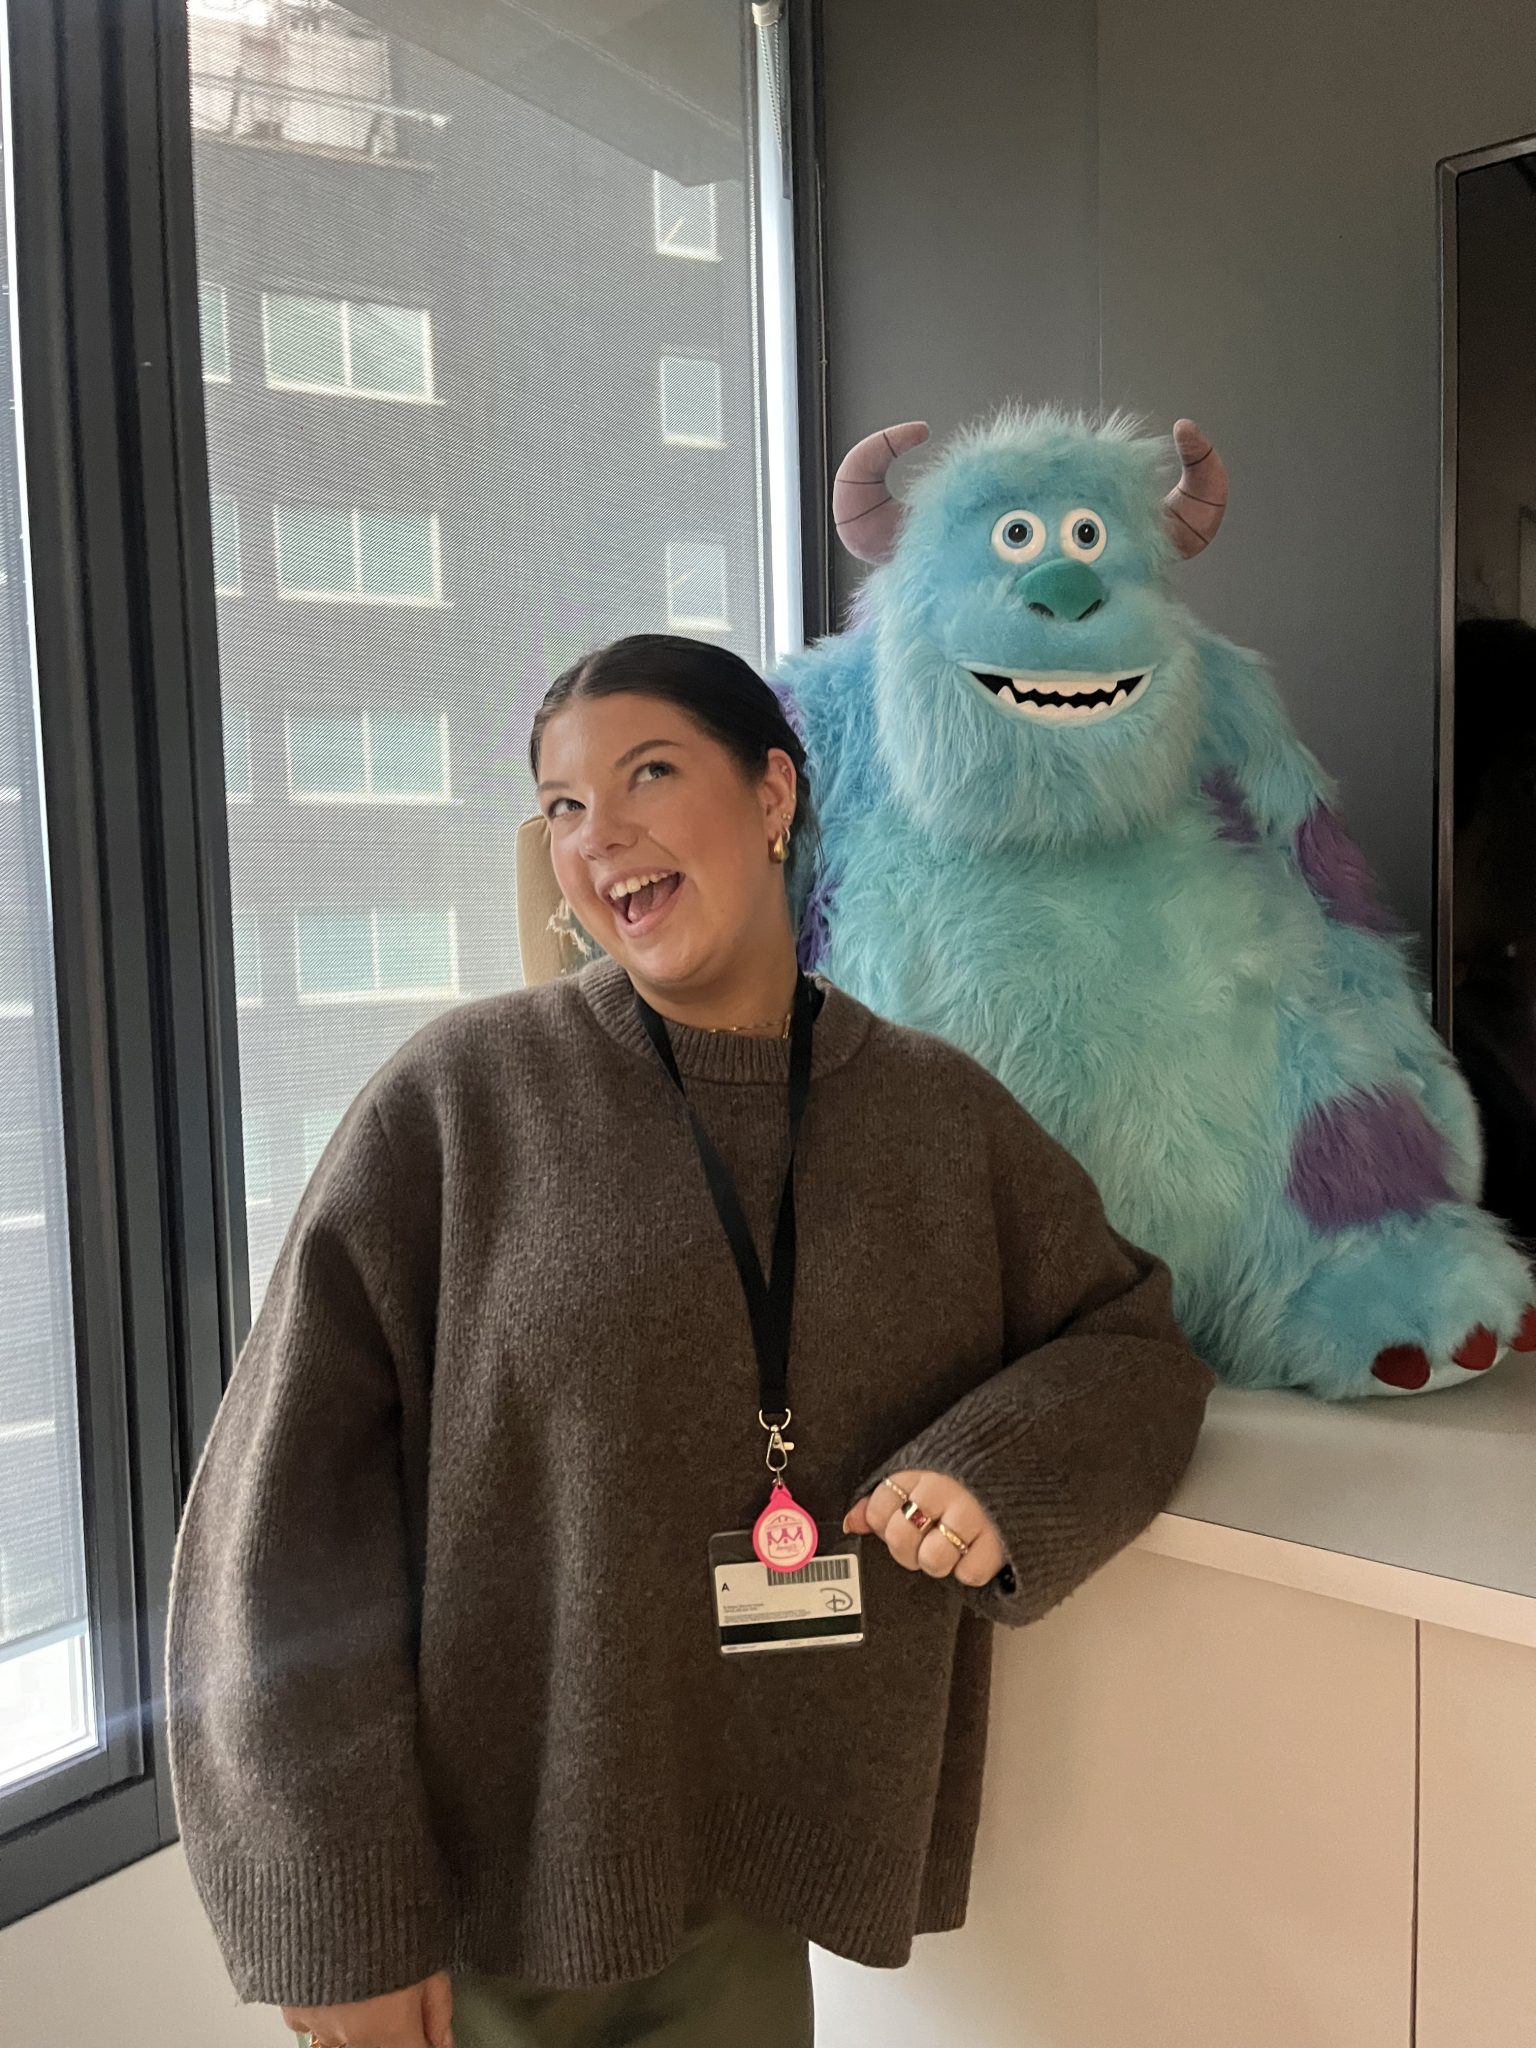 Photo of Ellen, Disney+ Marketing and Publicity Intern, in front of Sulley stuffed animal figure from Monsters, Inc.